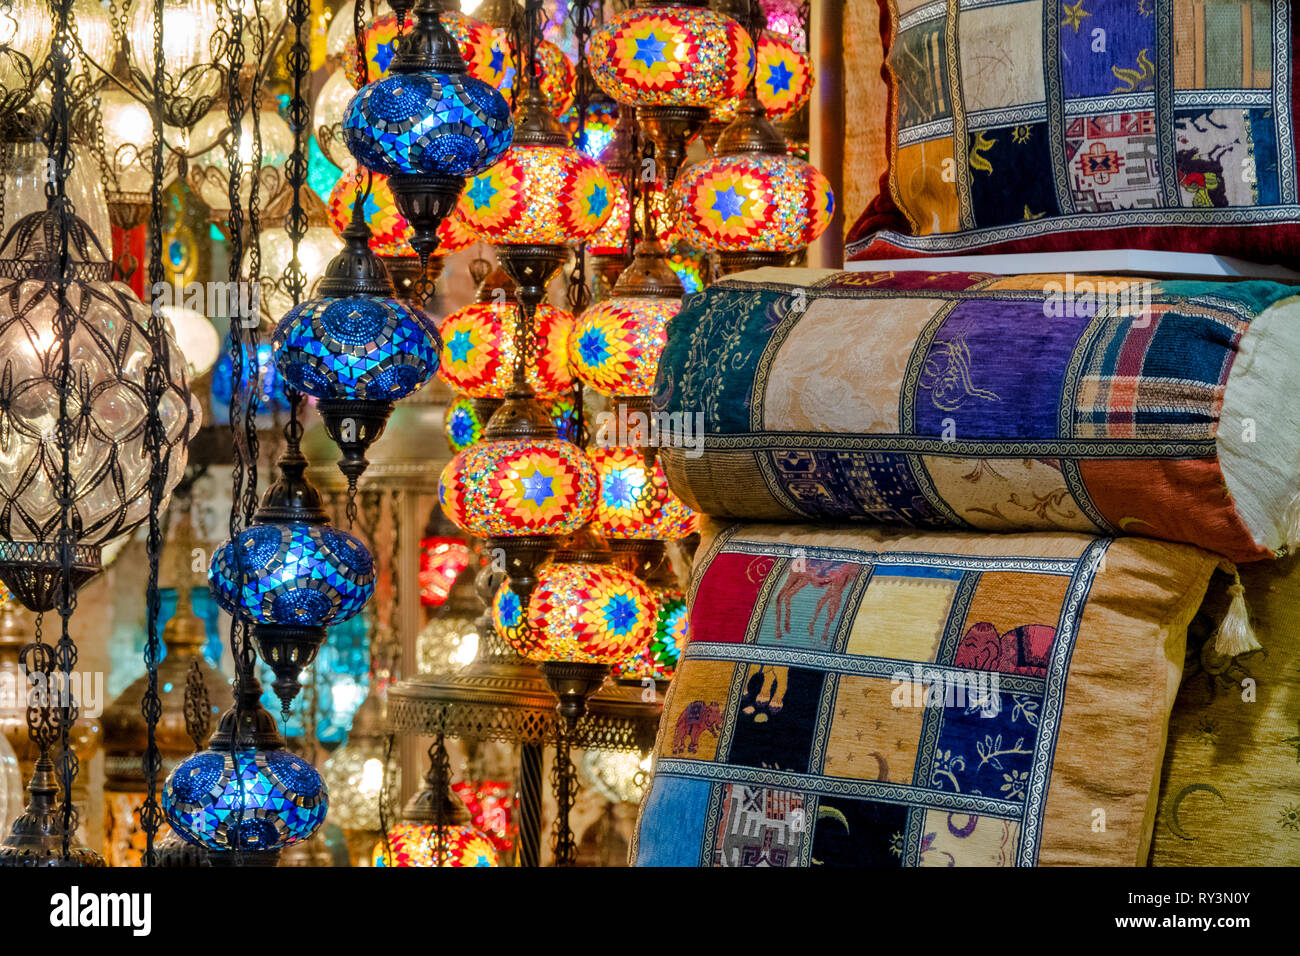 Close up shot of a hanging mosaic lamp and cushions in the Grand Bazaar, Istanbul, Turkey Stock Photo